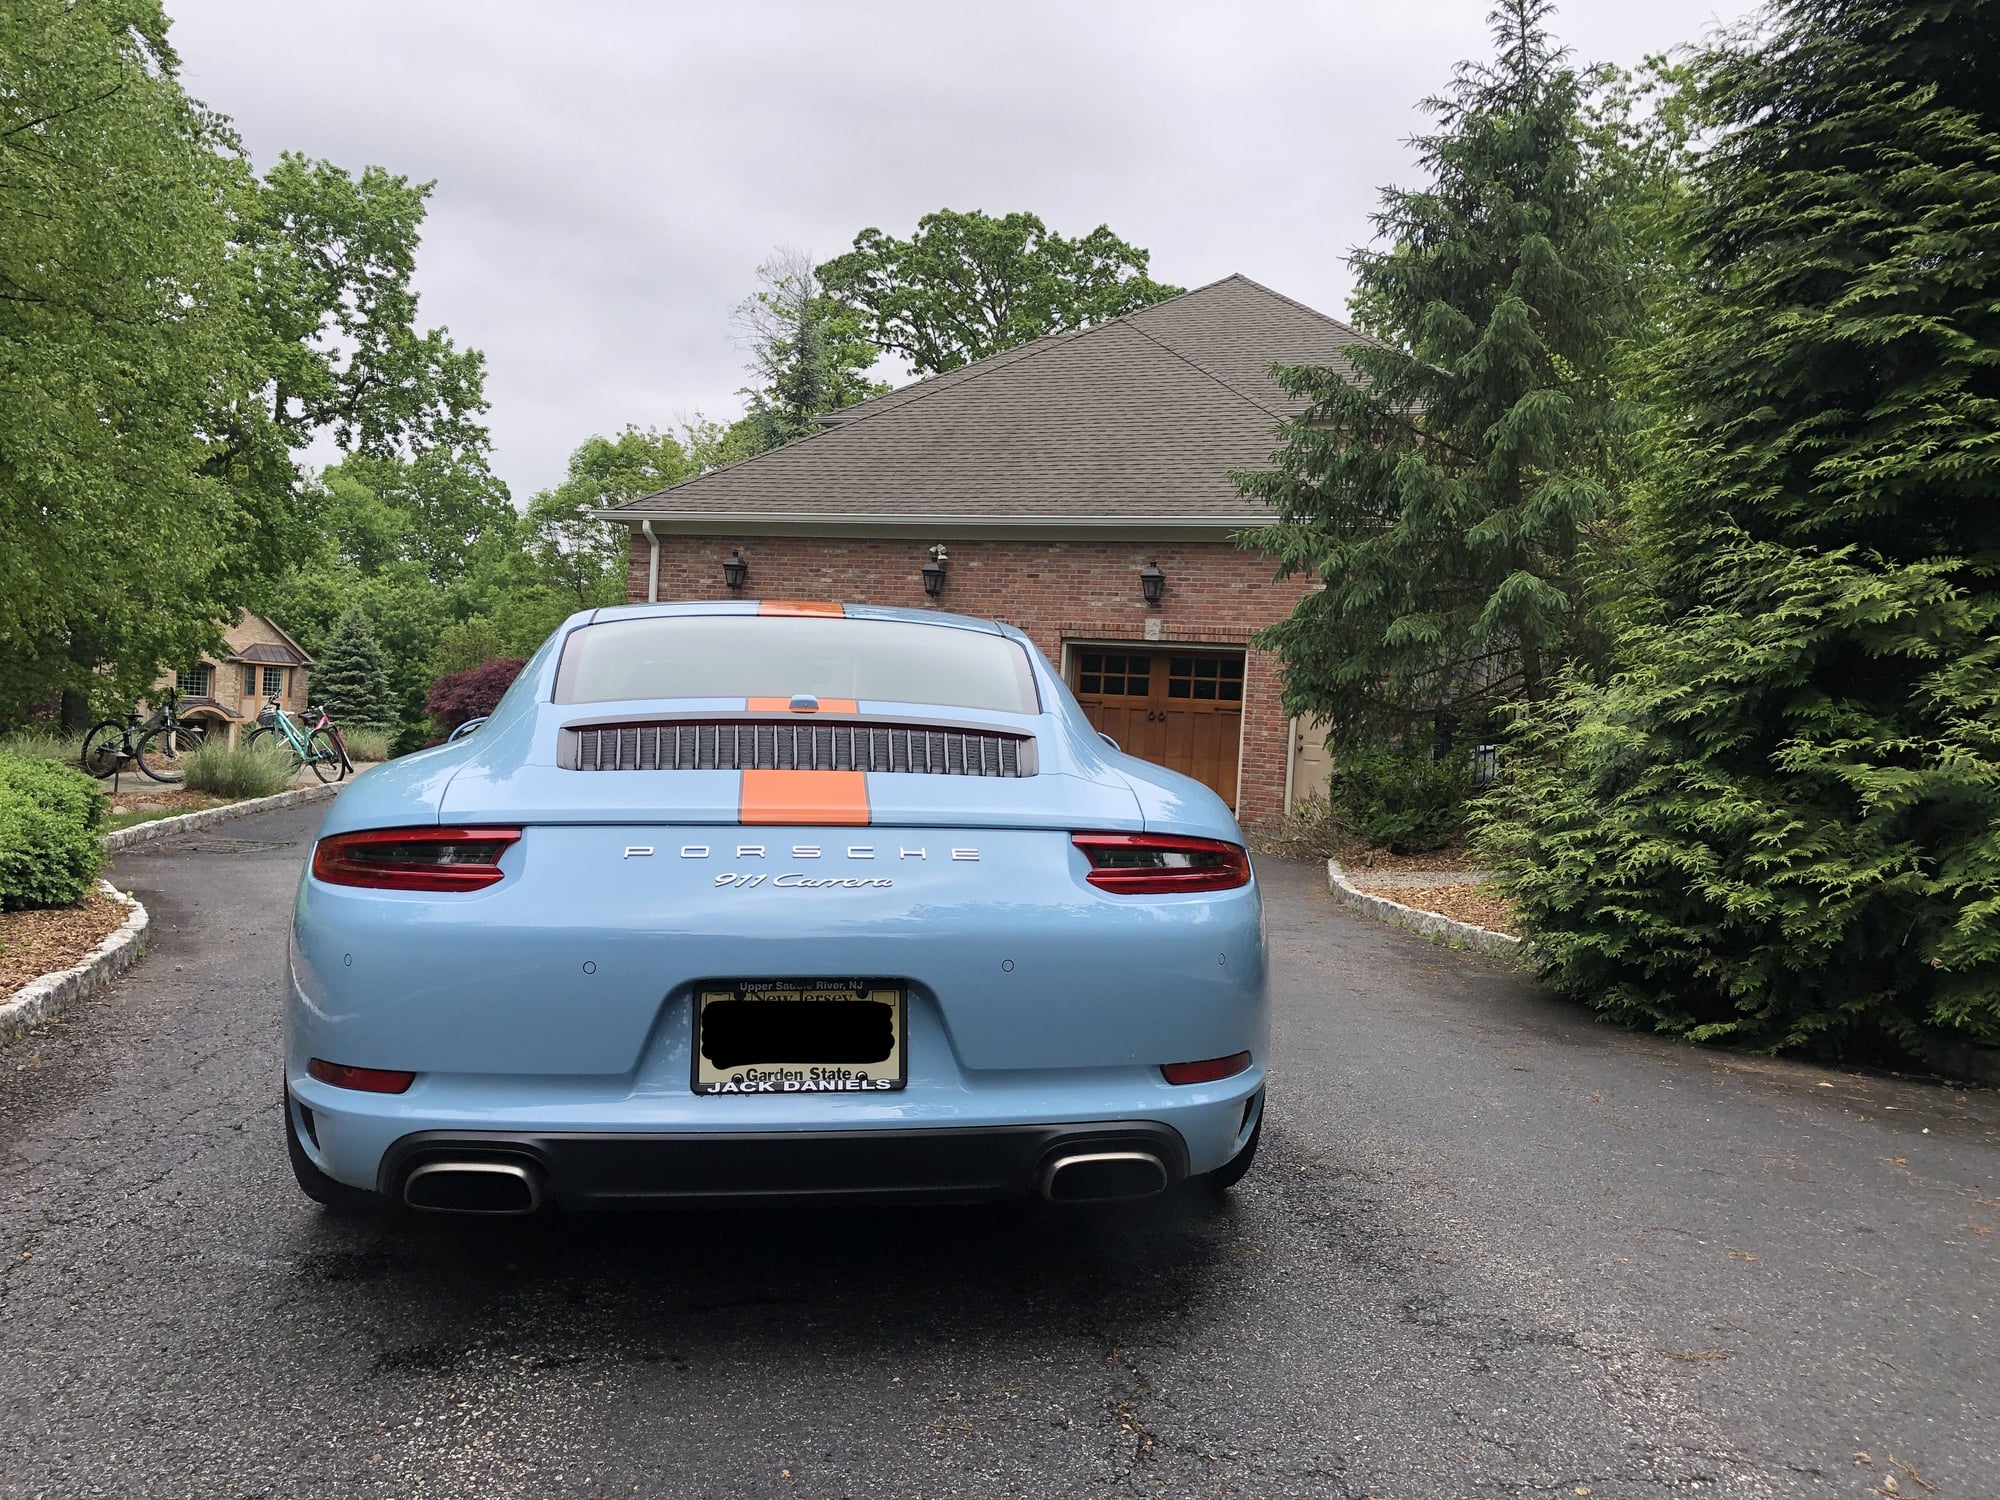 2017 Porsche 911 - 2017 Porsche Carrera, Gulf Blue, 4,100 miles - Used - VIN WP0AA2A92HS108405 - 4,100 Miles - 6 cyl - 2WD - Automatic - Coupe - Blue - Franklin Lakes, NJ 07417, United States